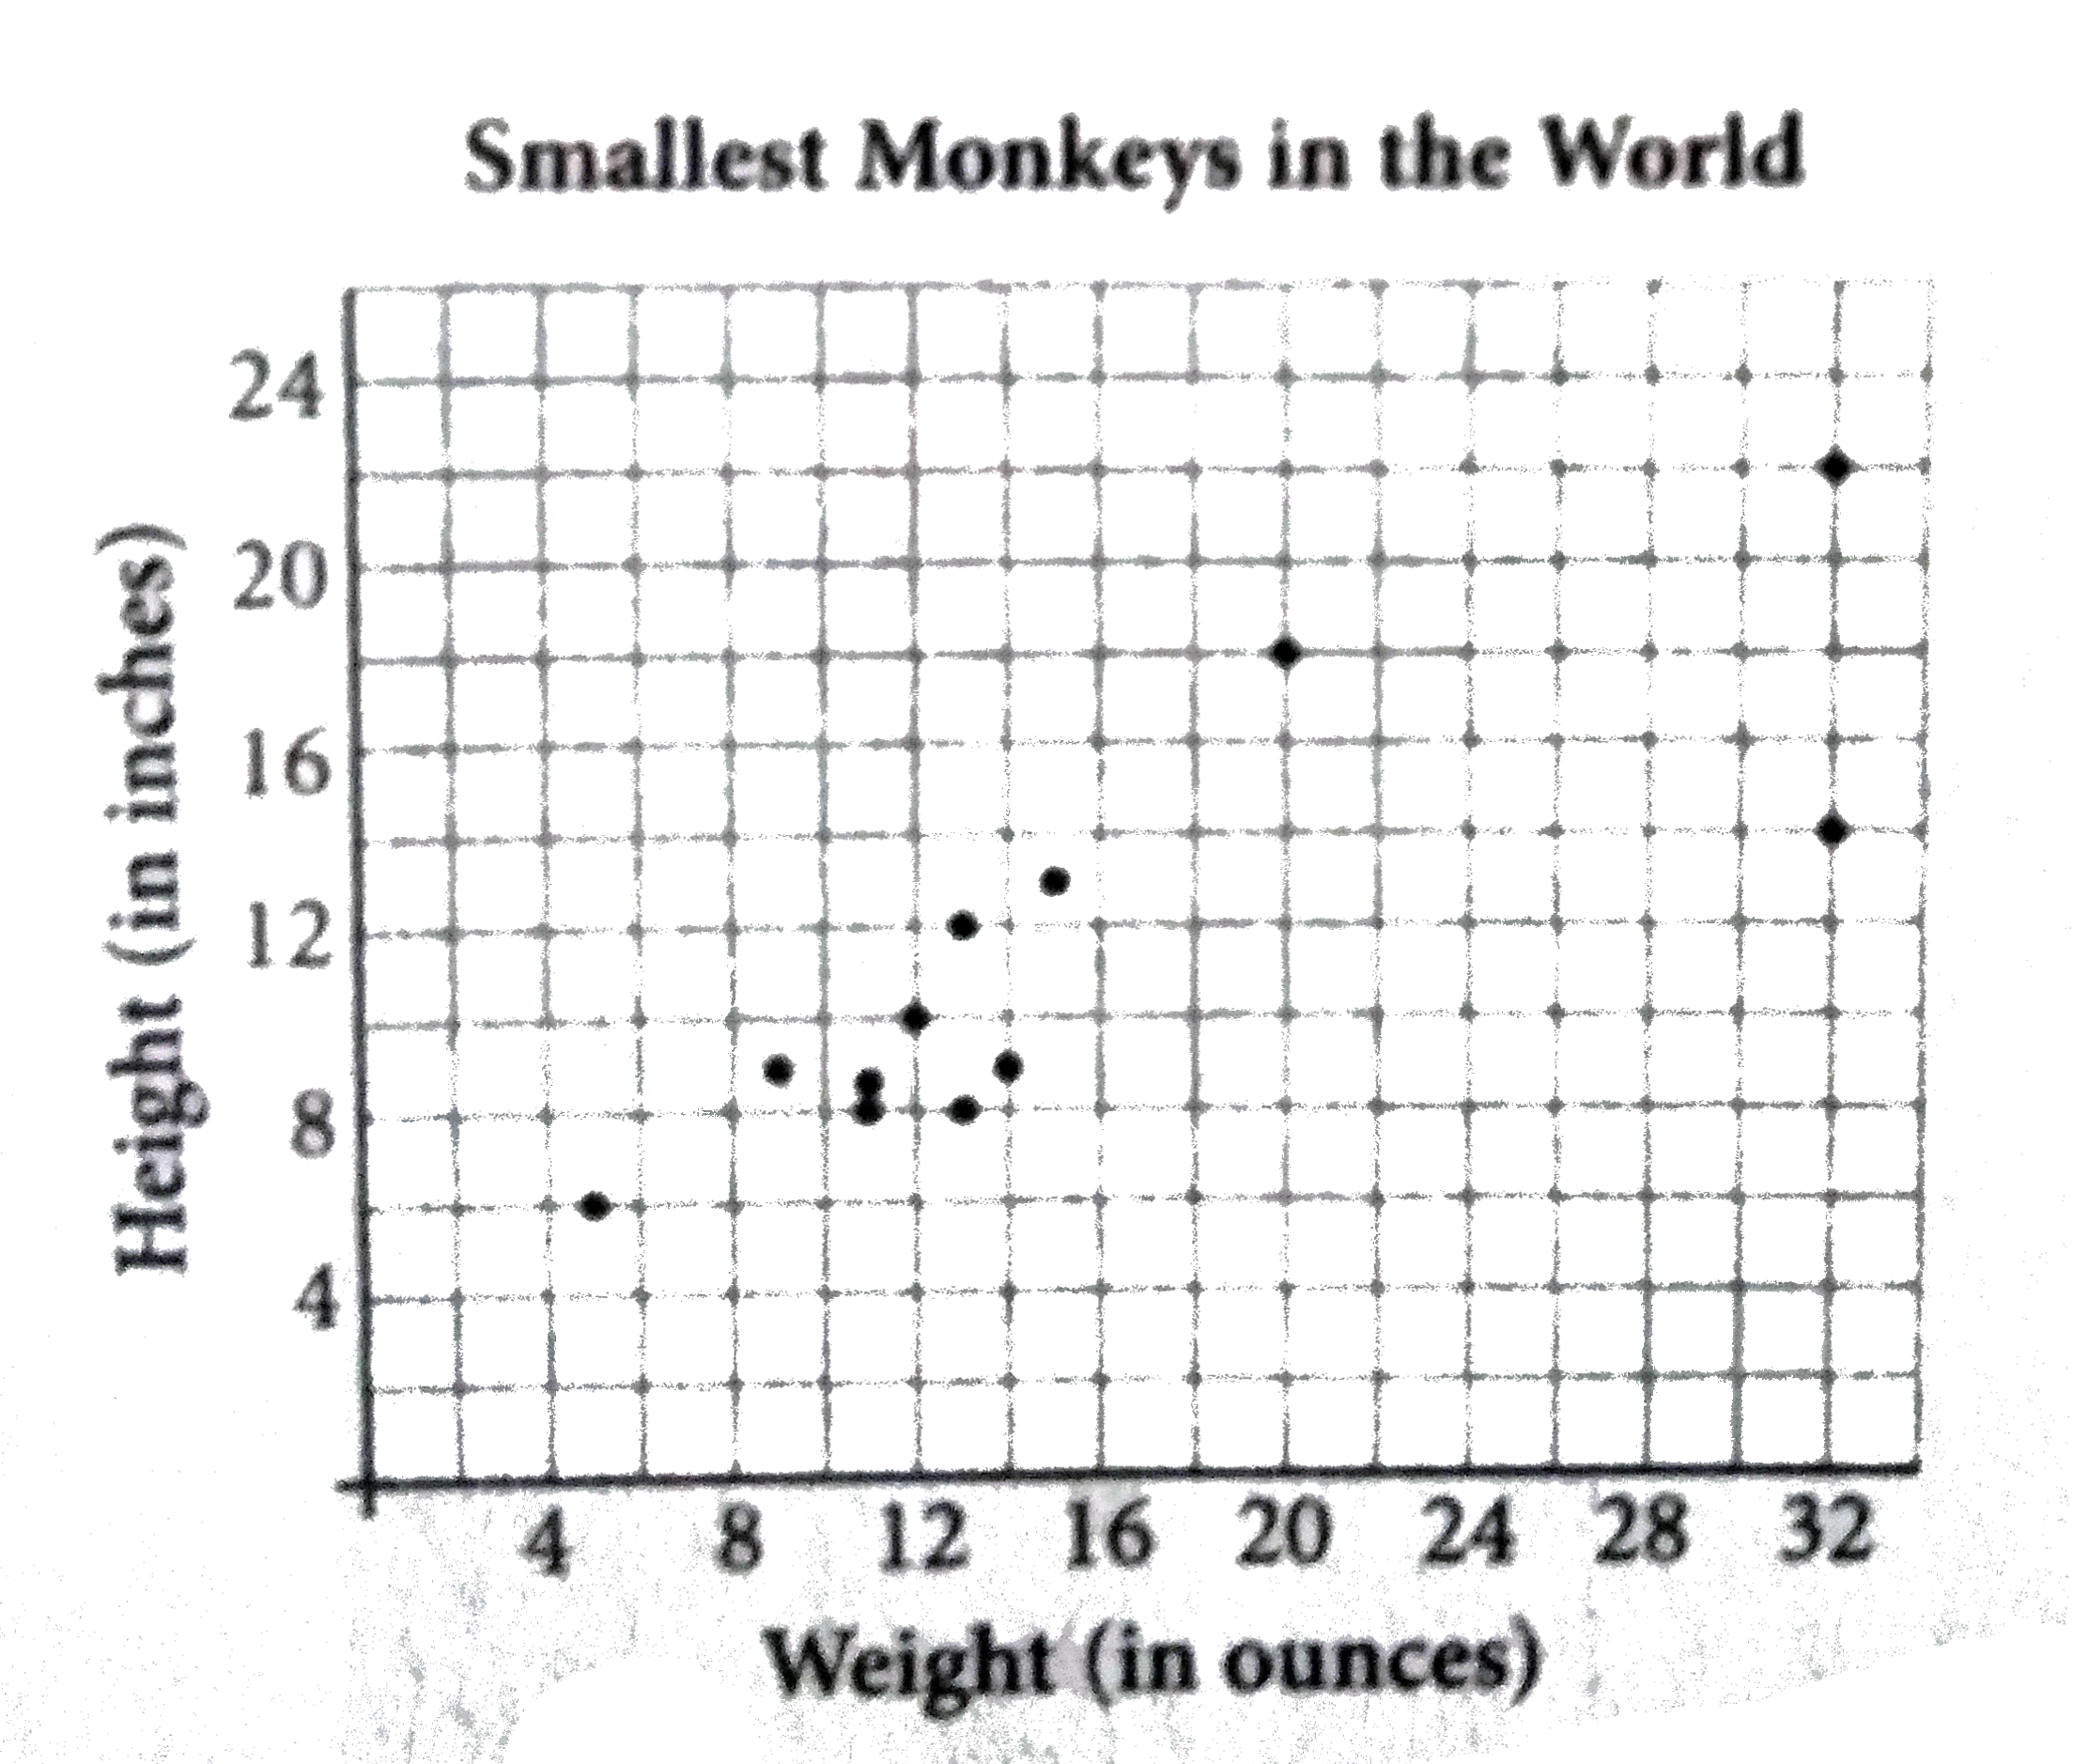 There are more than 250 known species of monkeys in the world. The scatterplot above shows the average height and weight of 12 species of particularly small monkeys, most of the which live in the Amazon Basin of South America. What is the height, in inches, of the monkeys represented by the data point that is farthest from the line of best fit (not shown)?